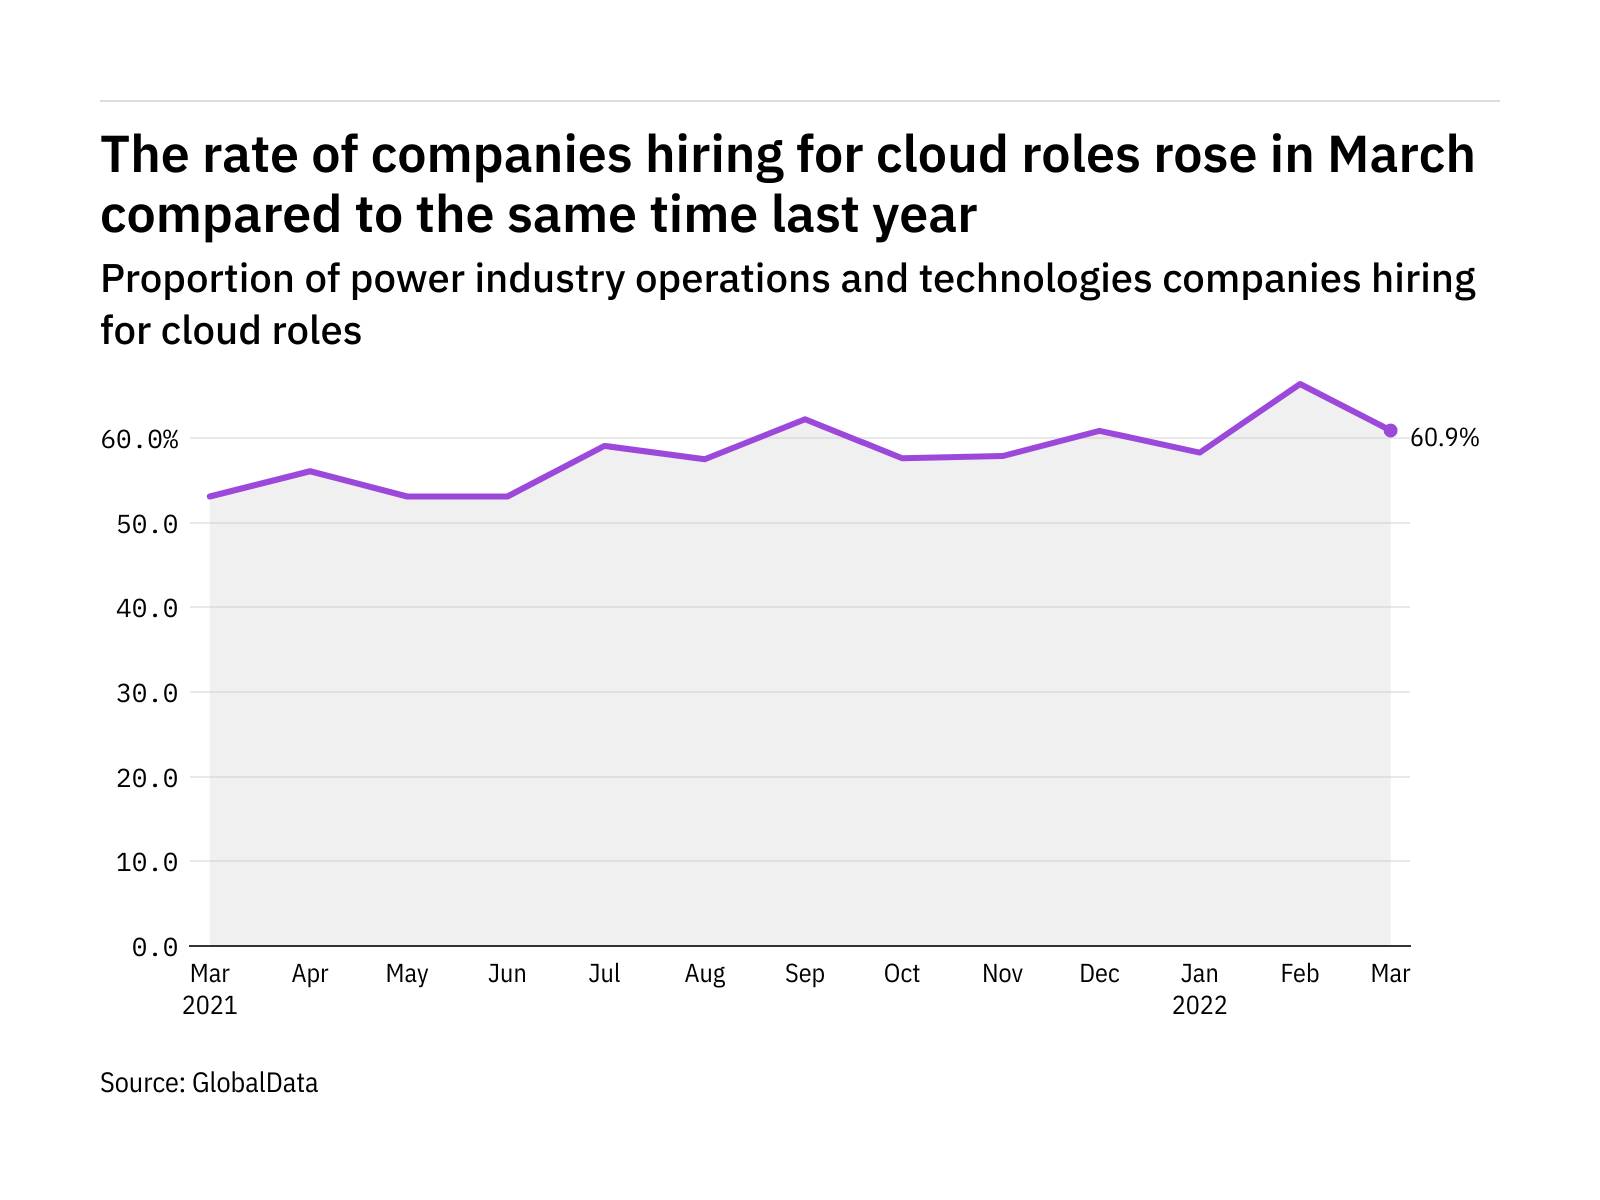 Cloud hiring levels in the power industry rose in March 2022